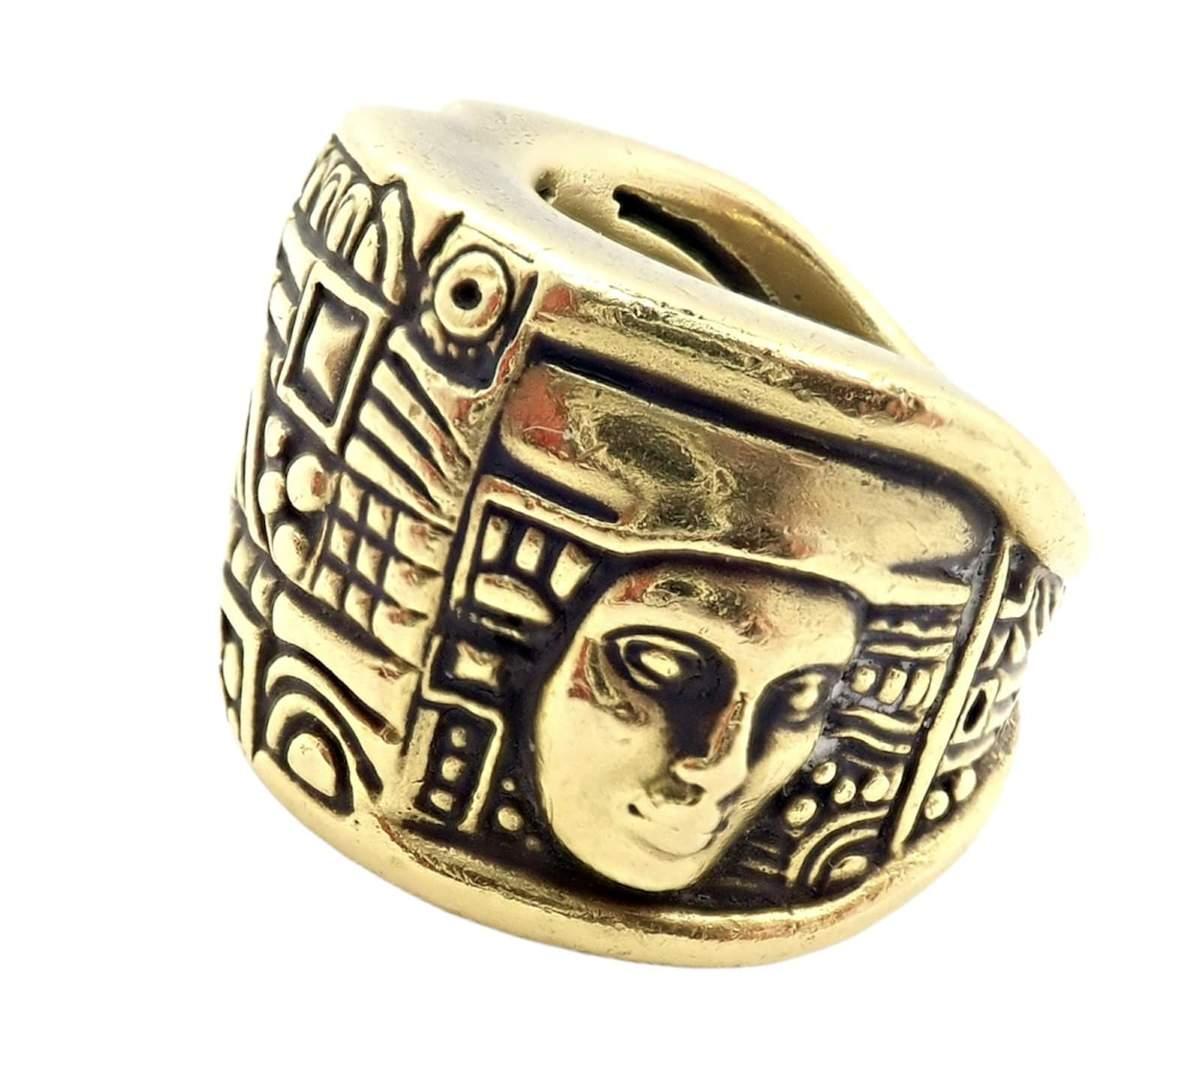 Barry Kieselstein Cord 18k Yellow Gold Women Of The World Ring.
This ring was Made in 1993. 
Metal: 18k Yellow Gold
Length: 6.25
Weight: 31.2 grams
Width at Top: 18mm
Stamped Hallmarks: B. Kieselstein Cord 1993 18k
*Free Shipping within the United